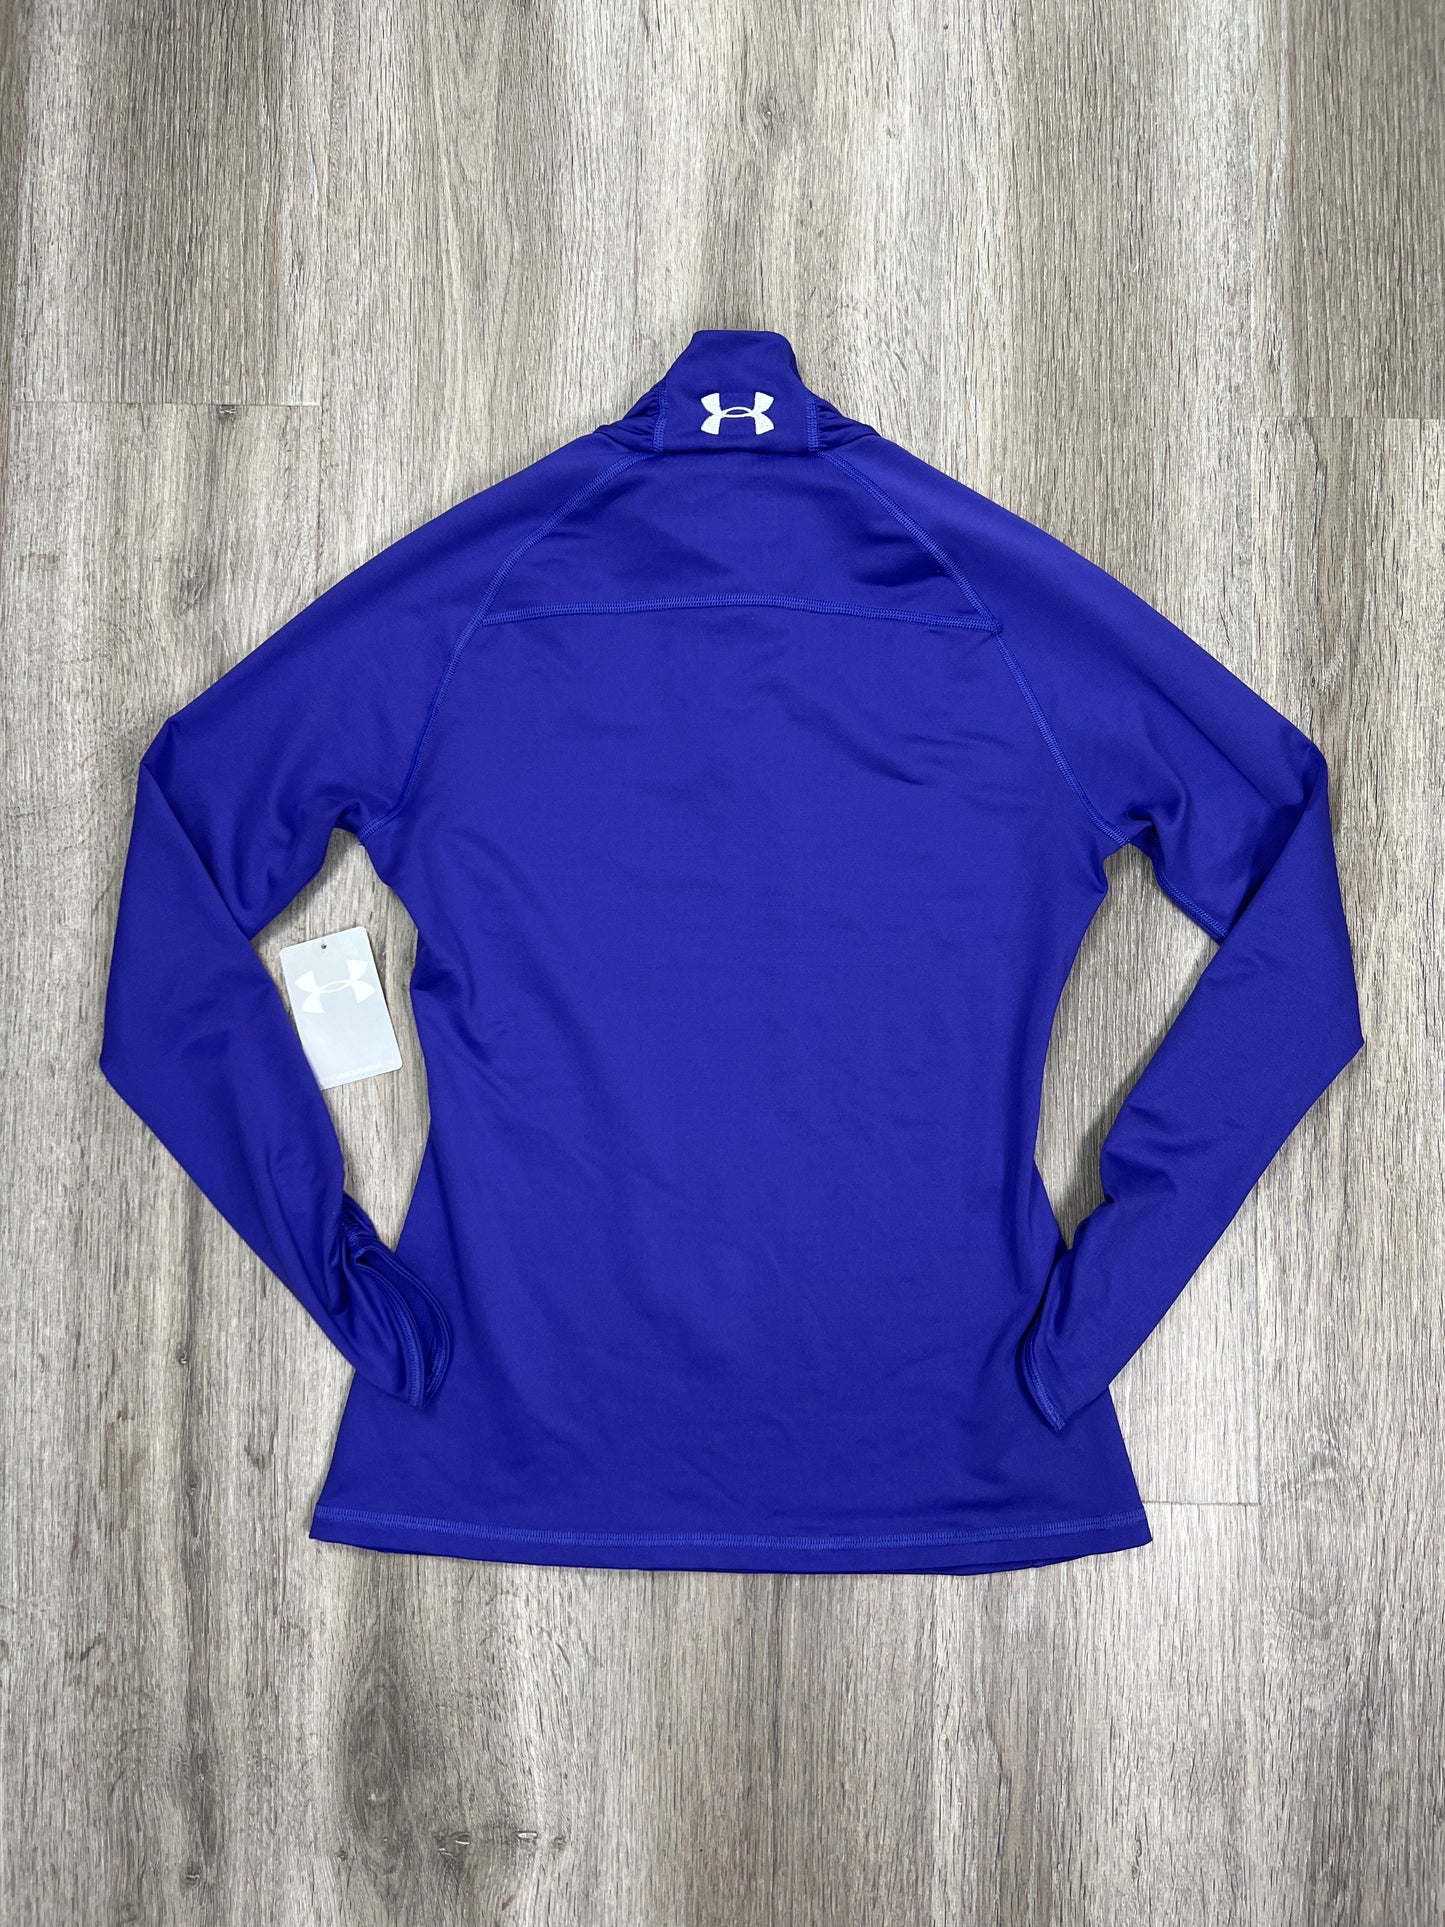 Athletic Top Long Sleeve Collar By Under Armour  Size: M